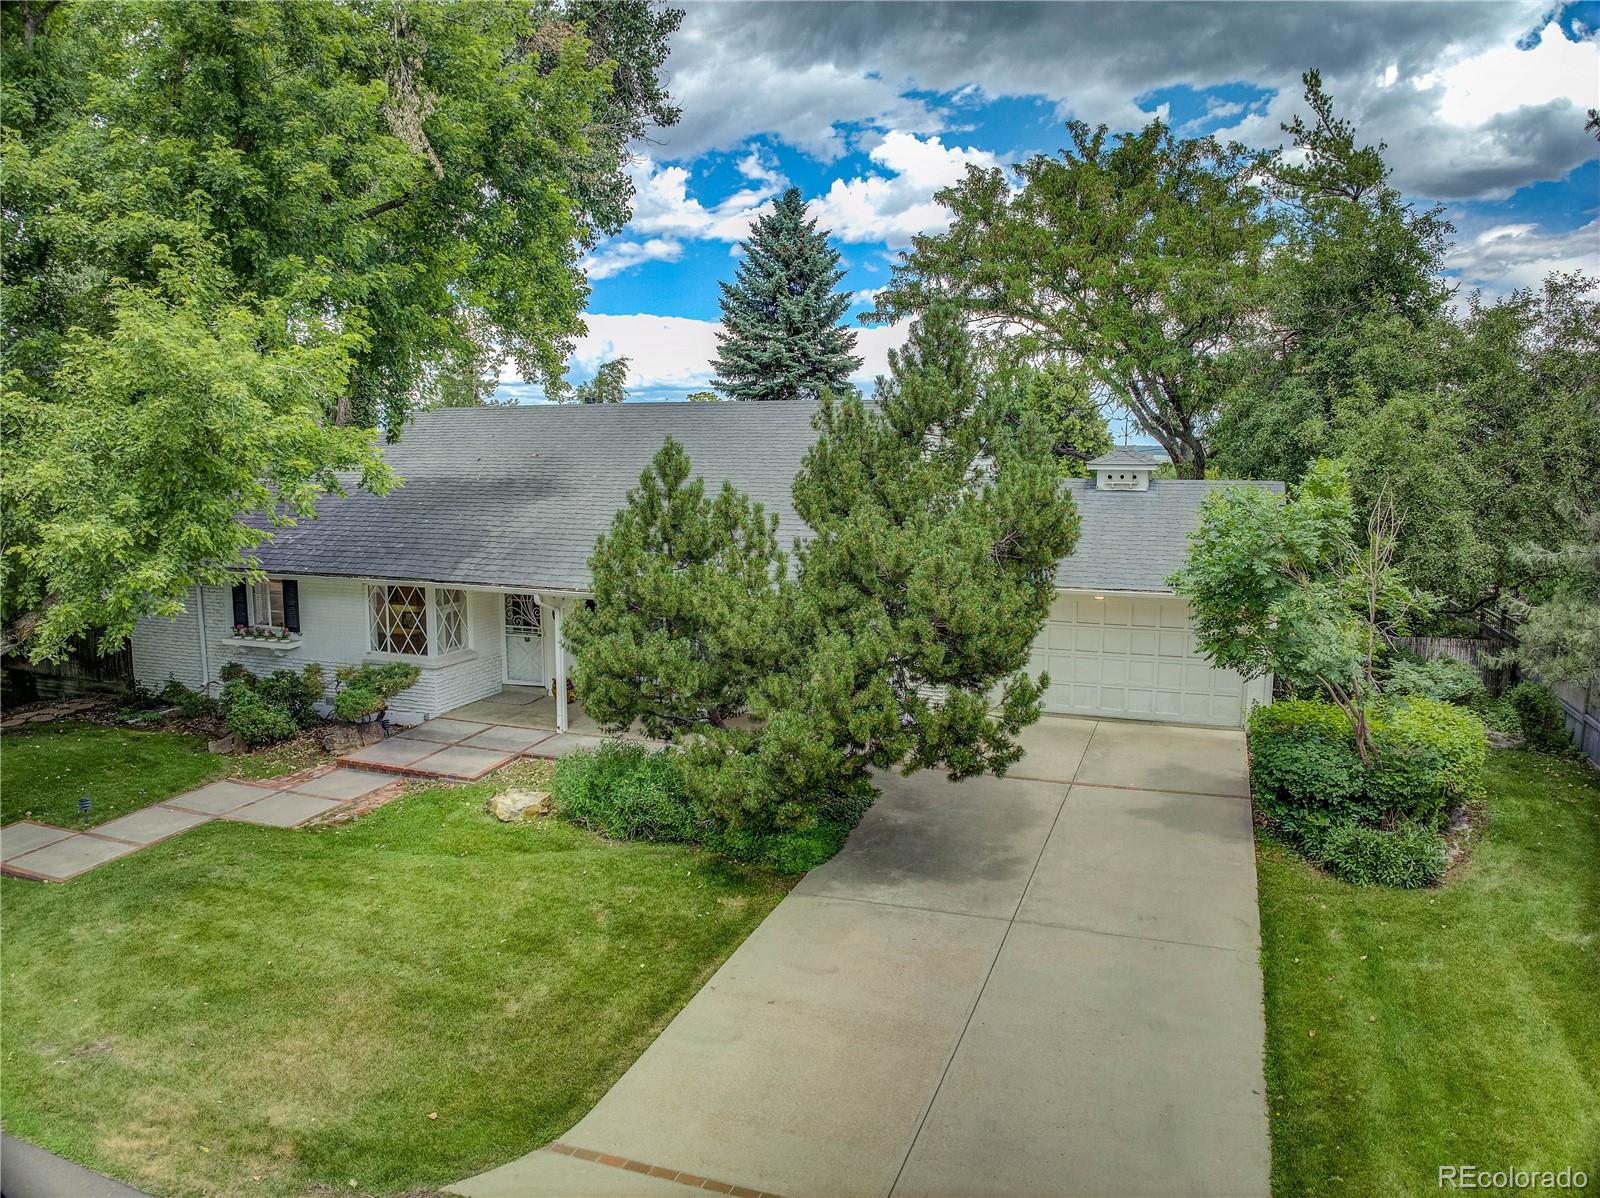 11705 24th Place, Lakewood, CO